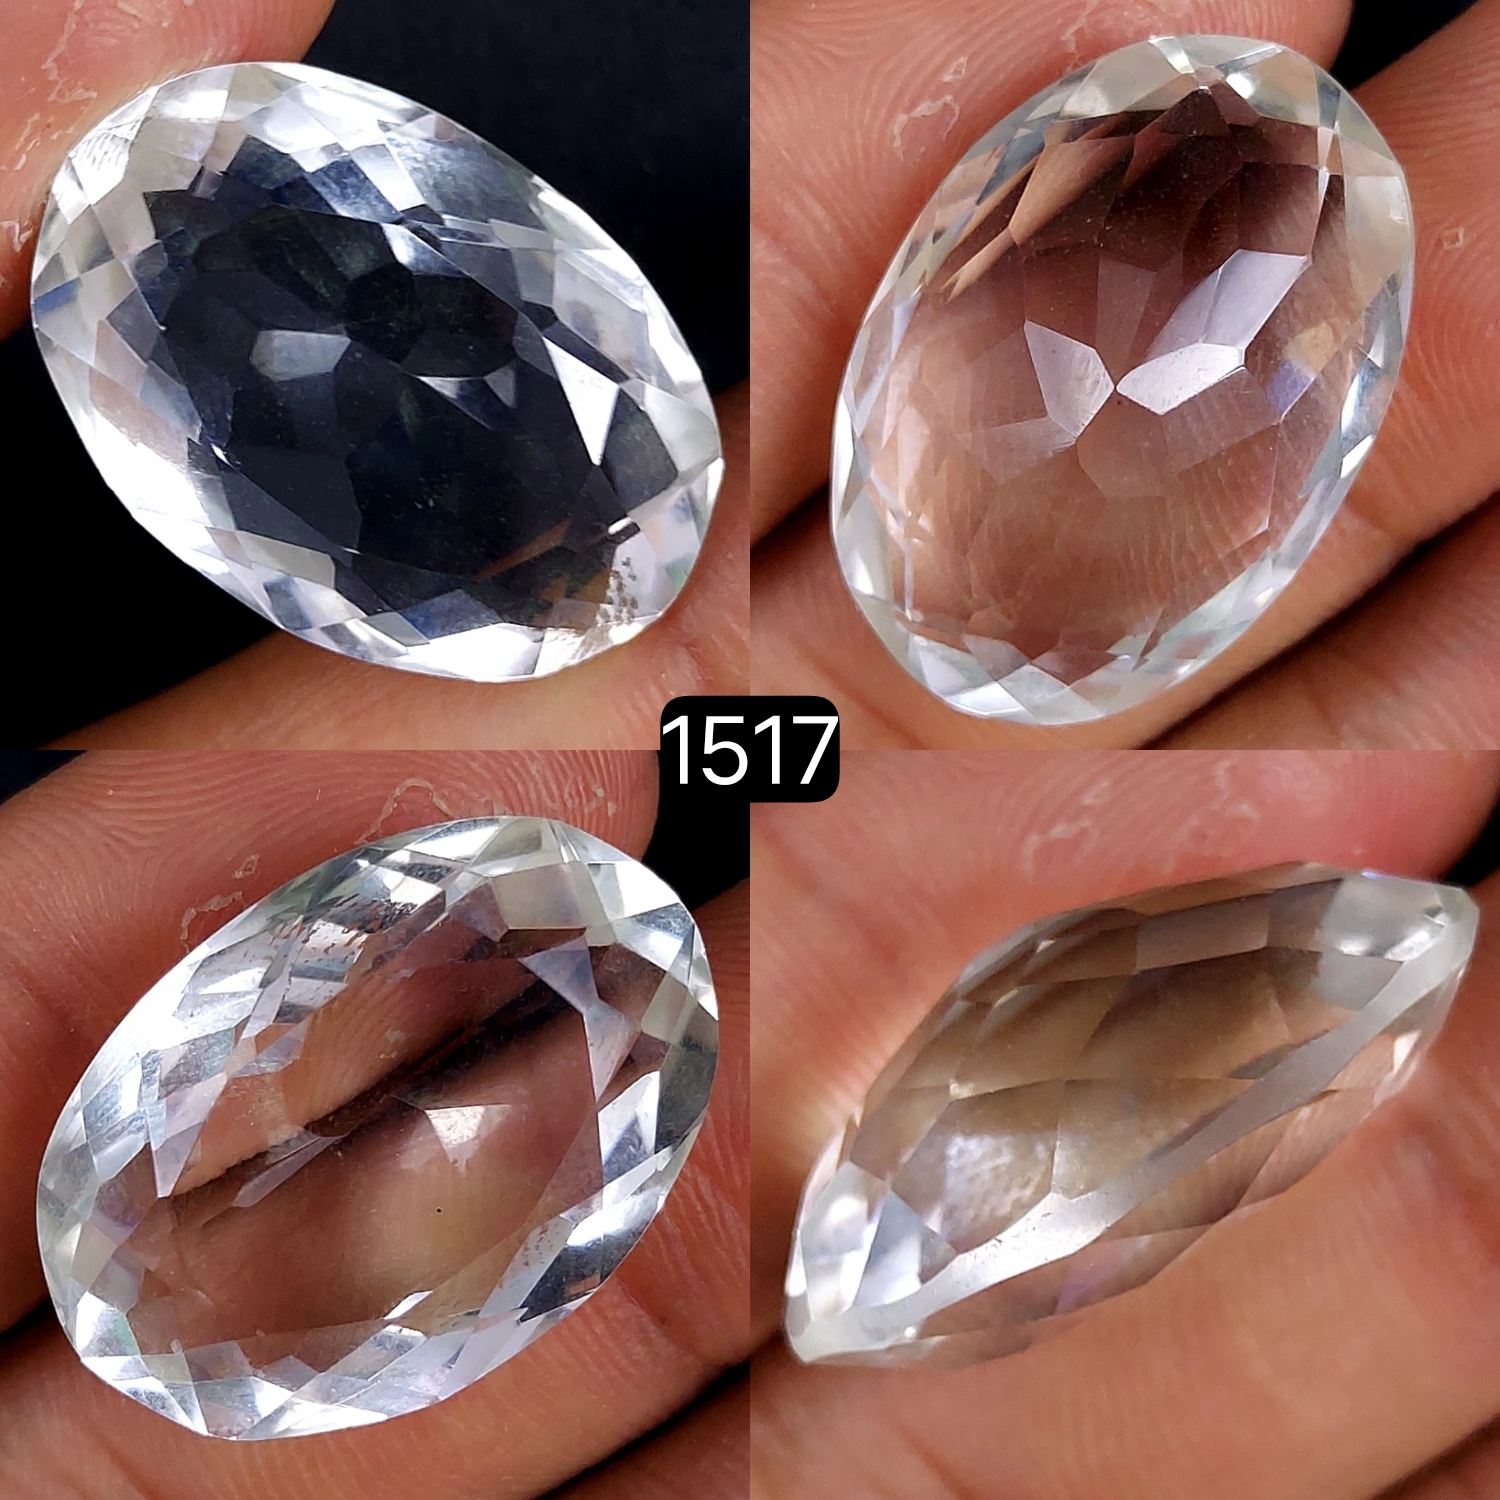 1Pc 38Cts Natural Crystal Quartz Faceted Cabochon Gemstone Oval Shape Crystal 28x19mm#1517